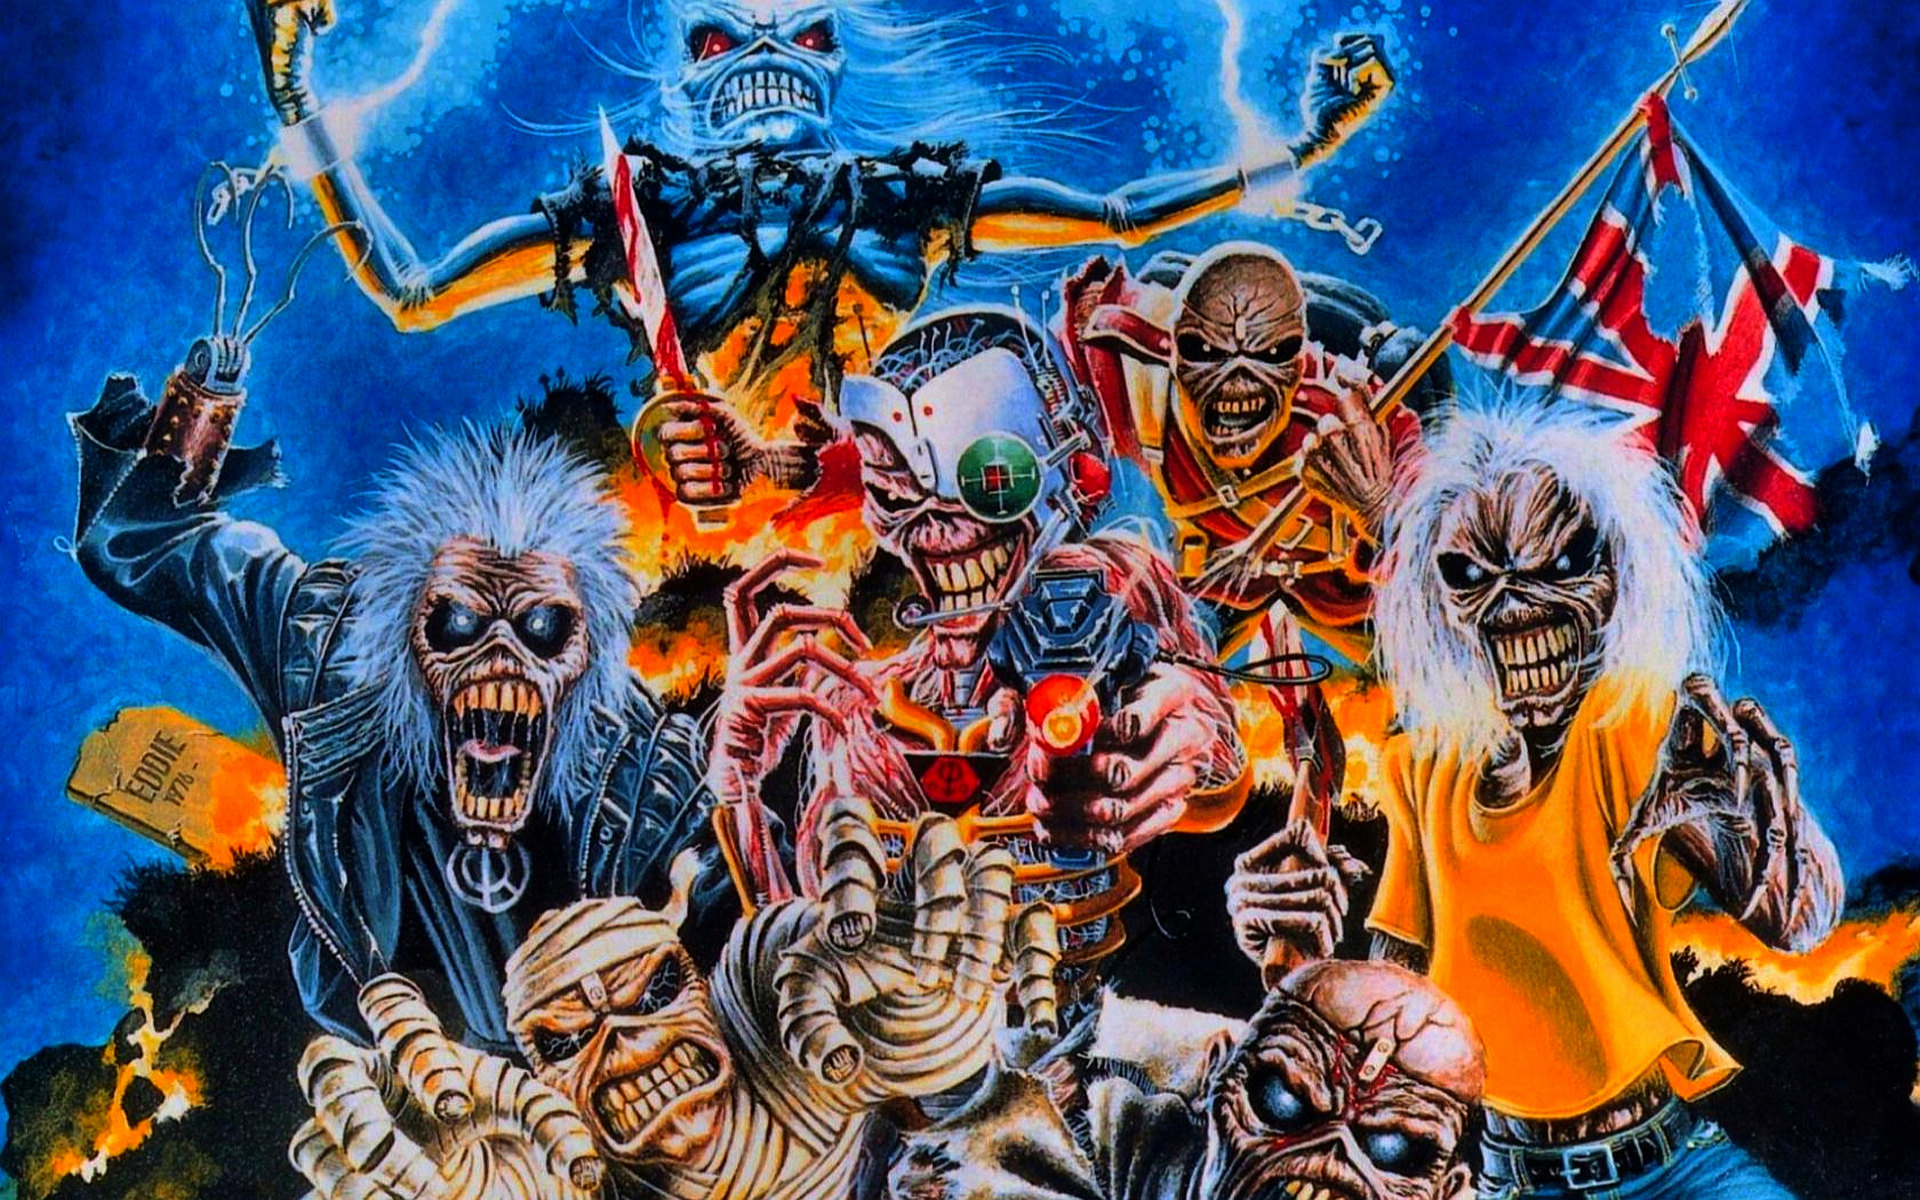 Iron Maiden Wallpaper Widescreen HD Image Amp Pictures Becuo